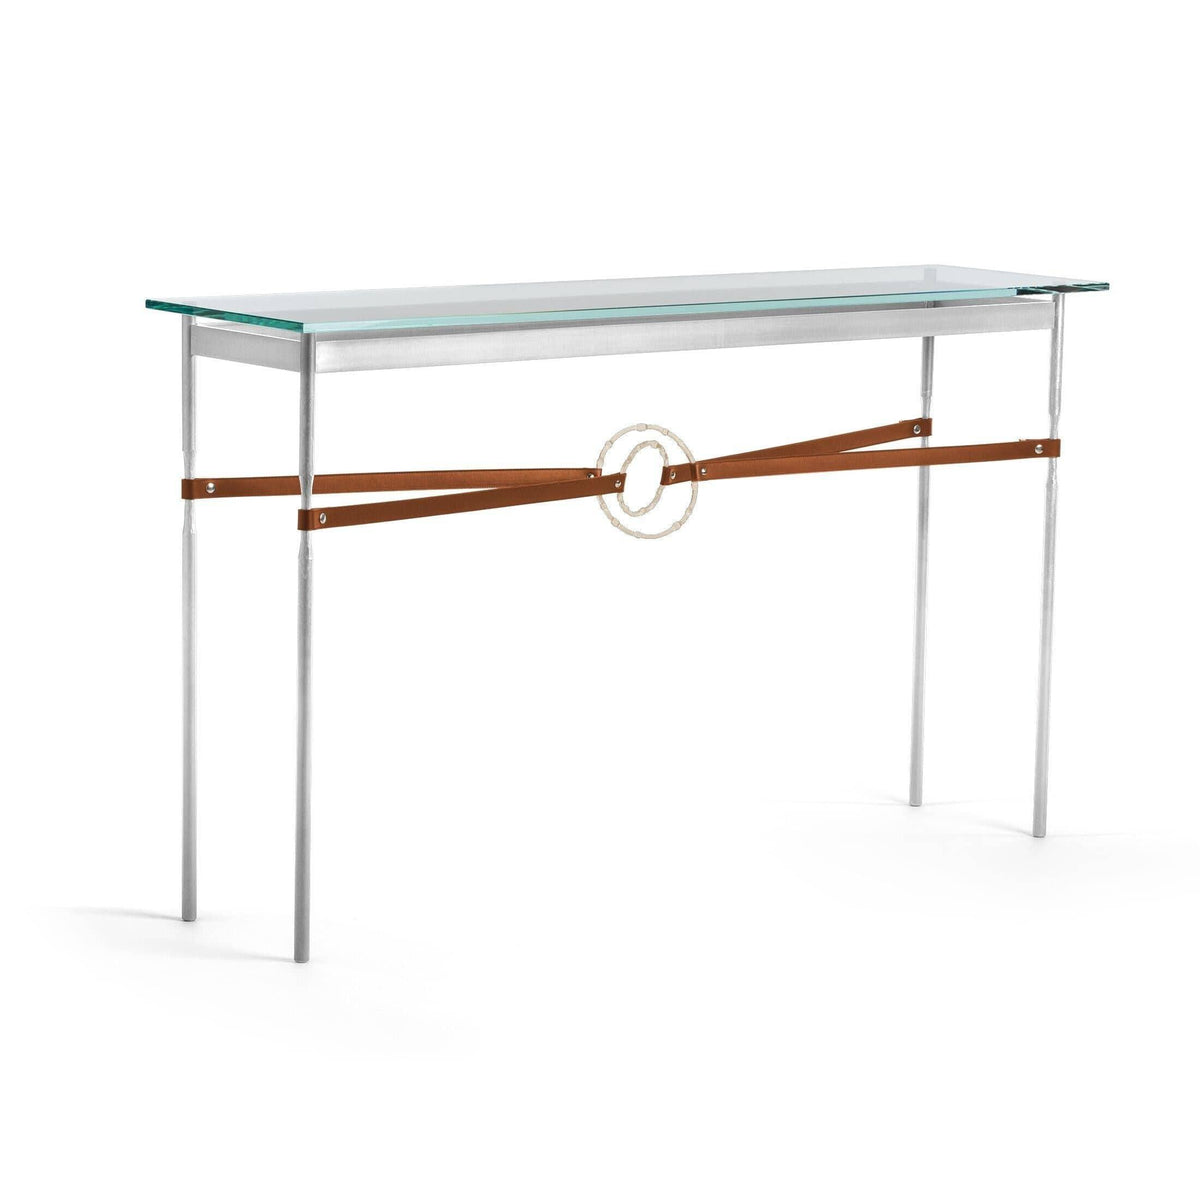 Hubbardton Forge - Equus Chestnut Leather Console Table - 750118-85-84-LC-VA0714 | Montreal Lighting & Hardware